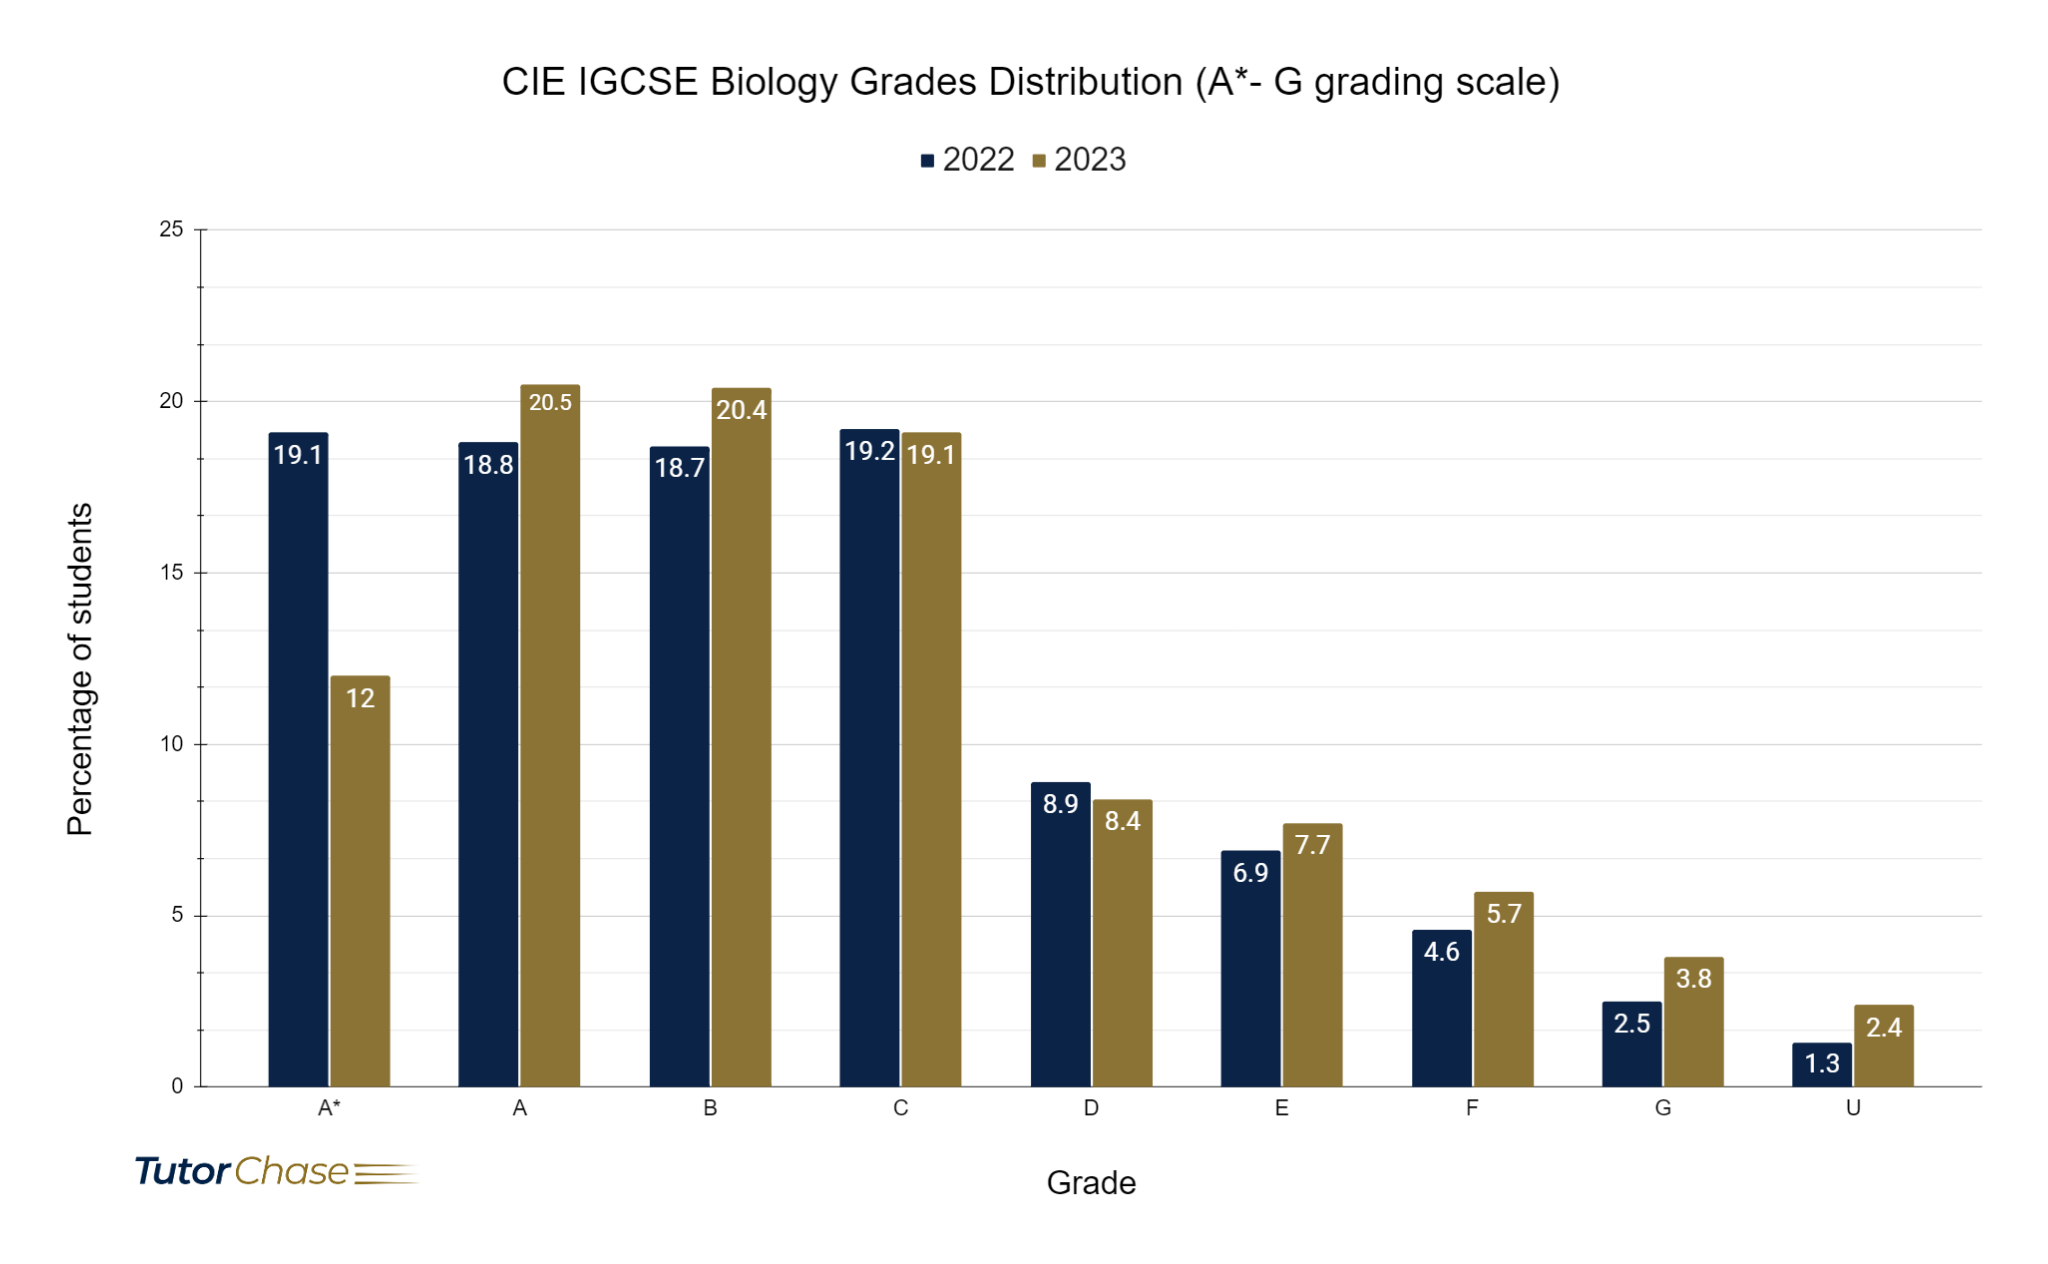 Grades distribution of CIE IGCSE Biology for 2022 and 2023